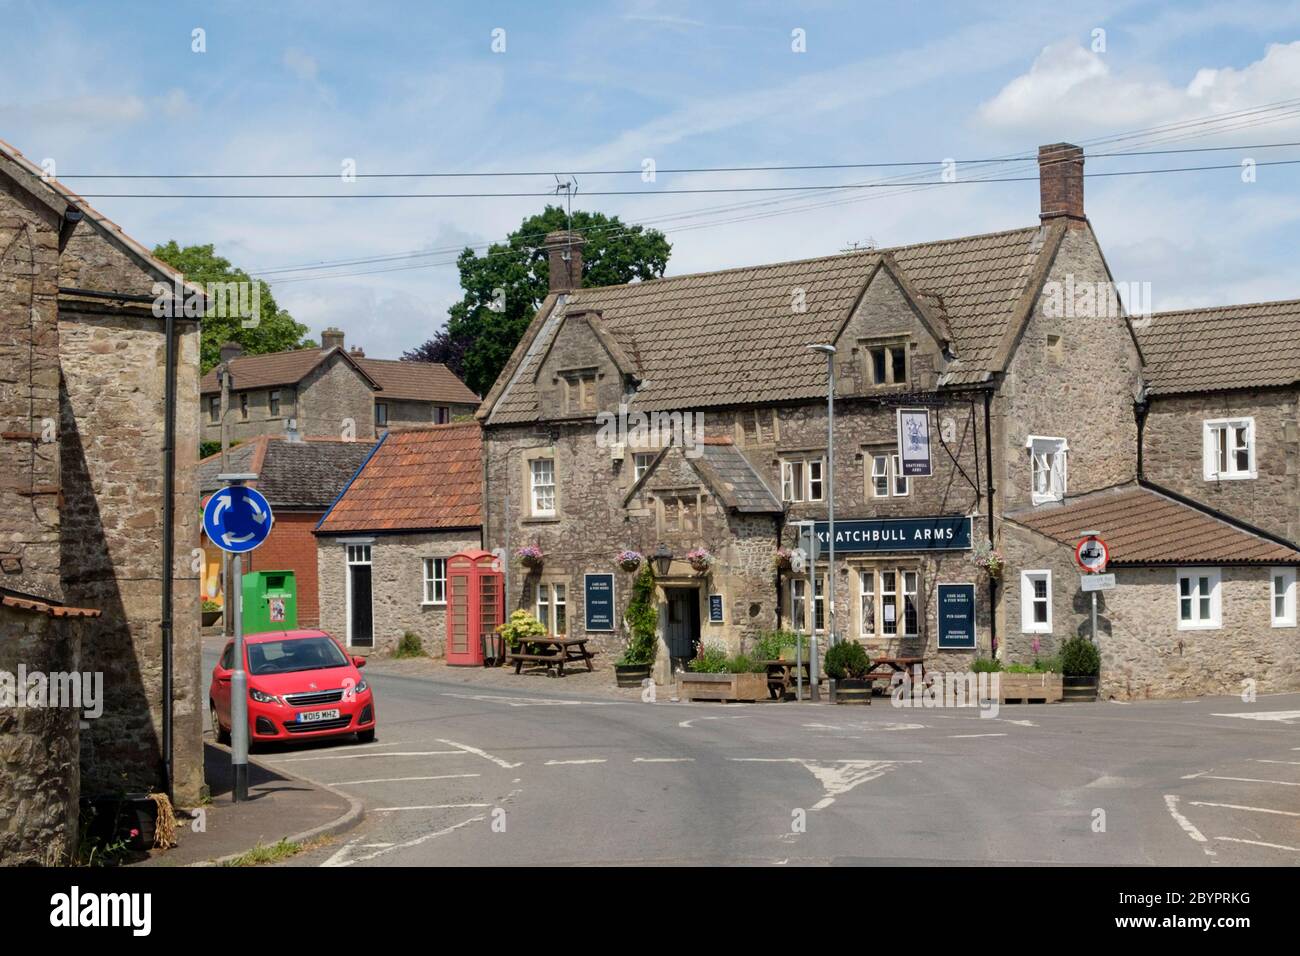 The Knatchbull Arms, A village pub in Stoke St Michael a Somerset village on the Mendip Hills. Stock Photo